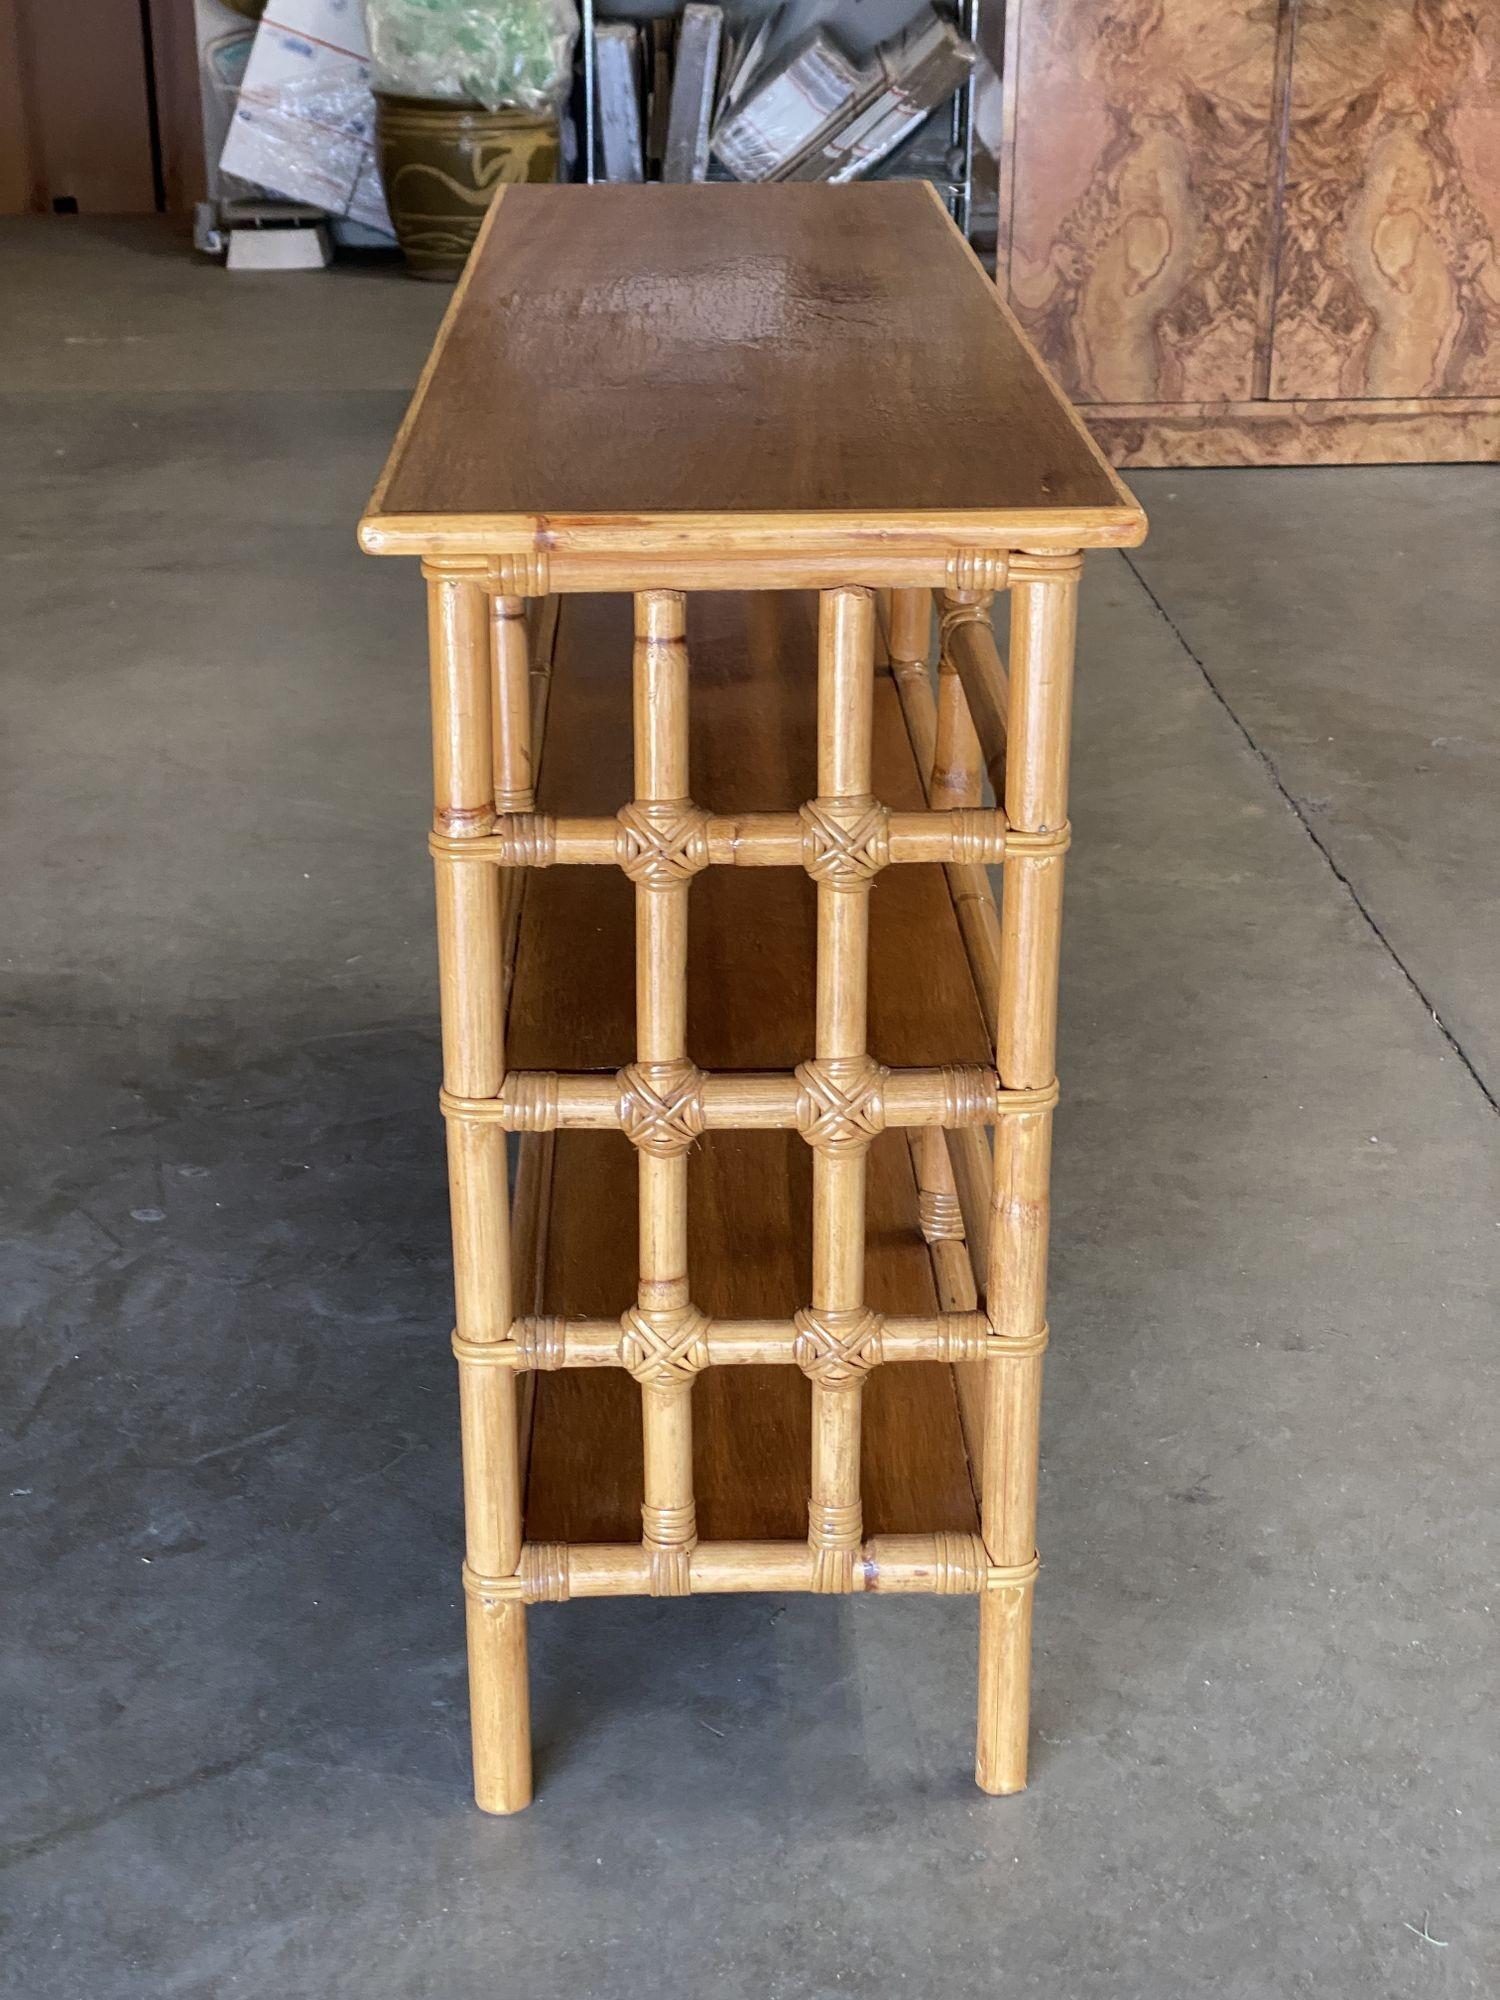 Imaculately Restored Three-Tier Ladder Sides BookShelf Console Table w/ Mahogany In Excellent Condition For Sale In Van Nuys, CA